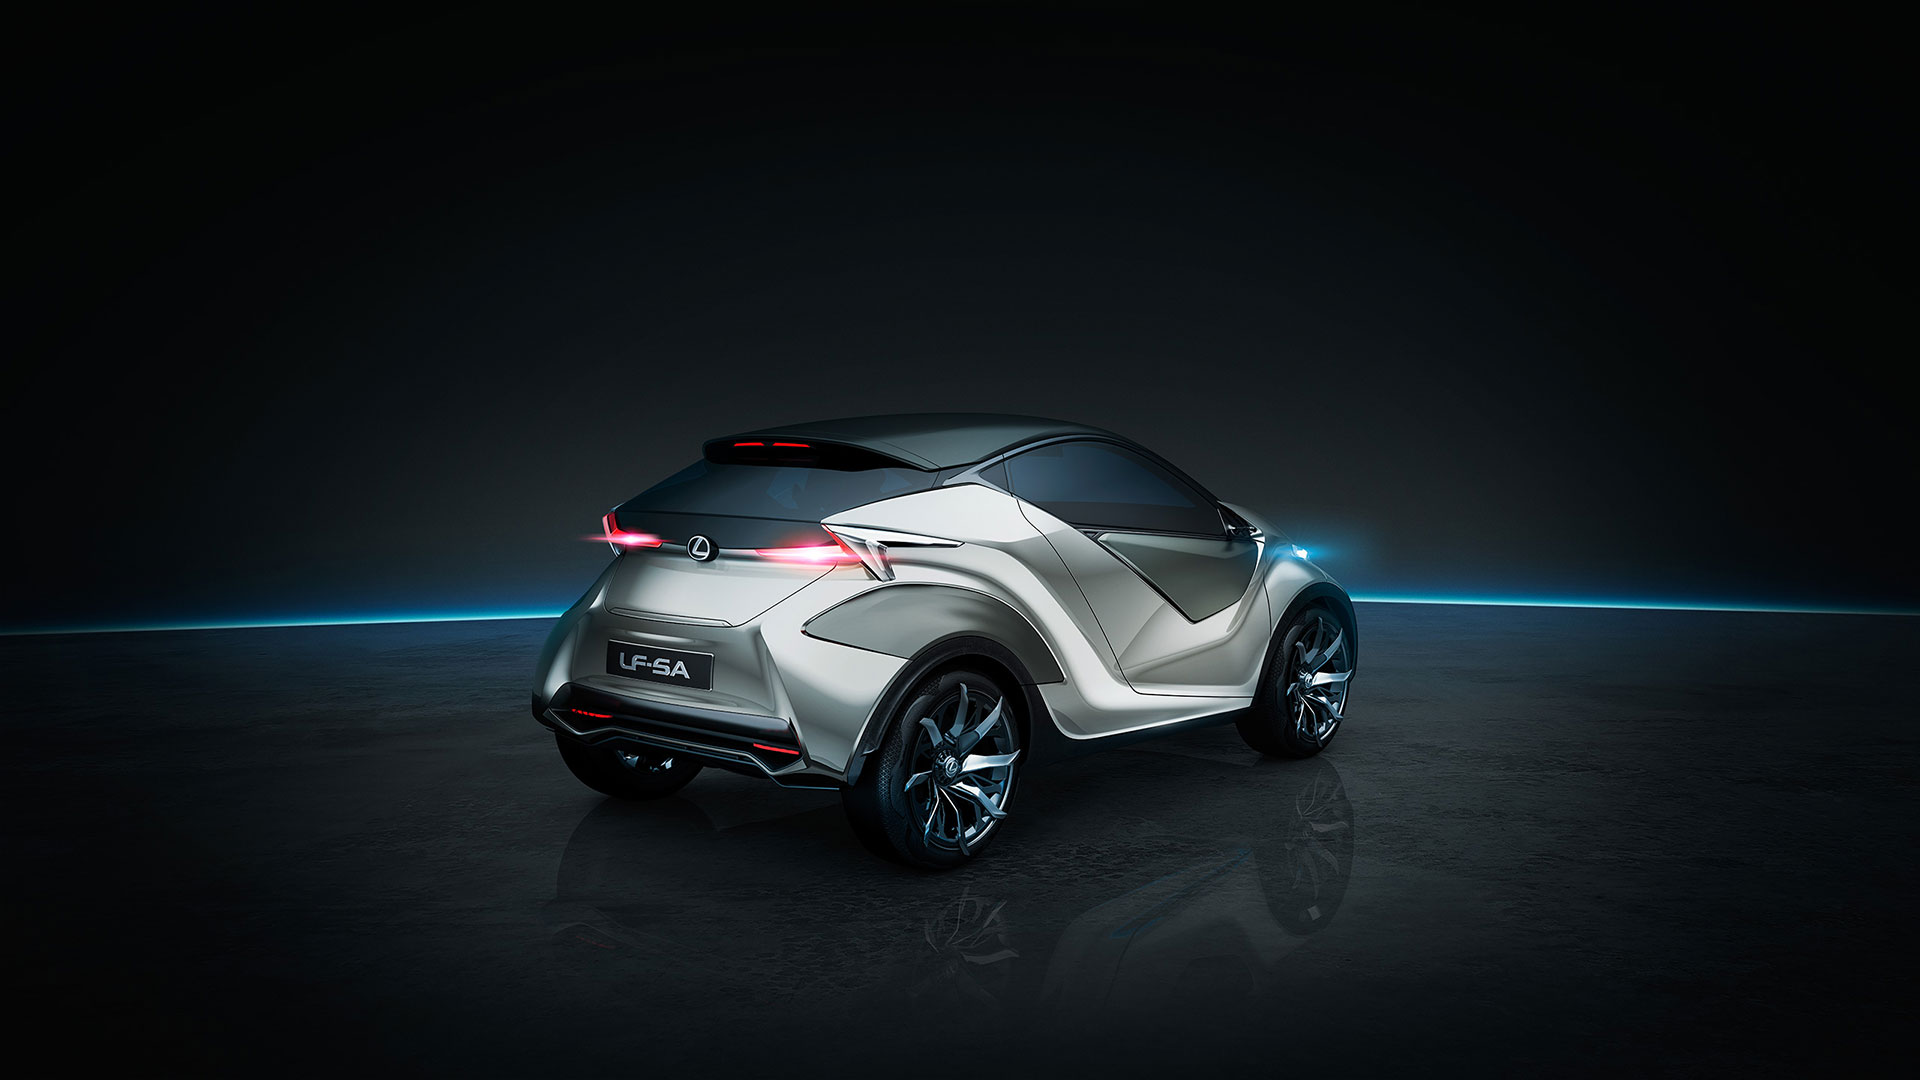 CONCEPT ULTRA-COMPACT